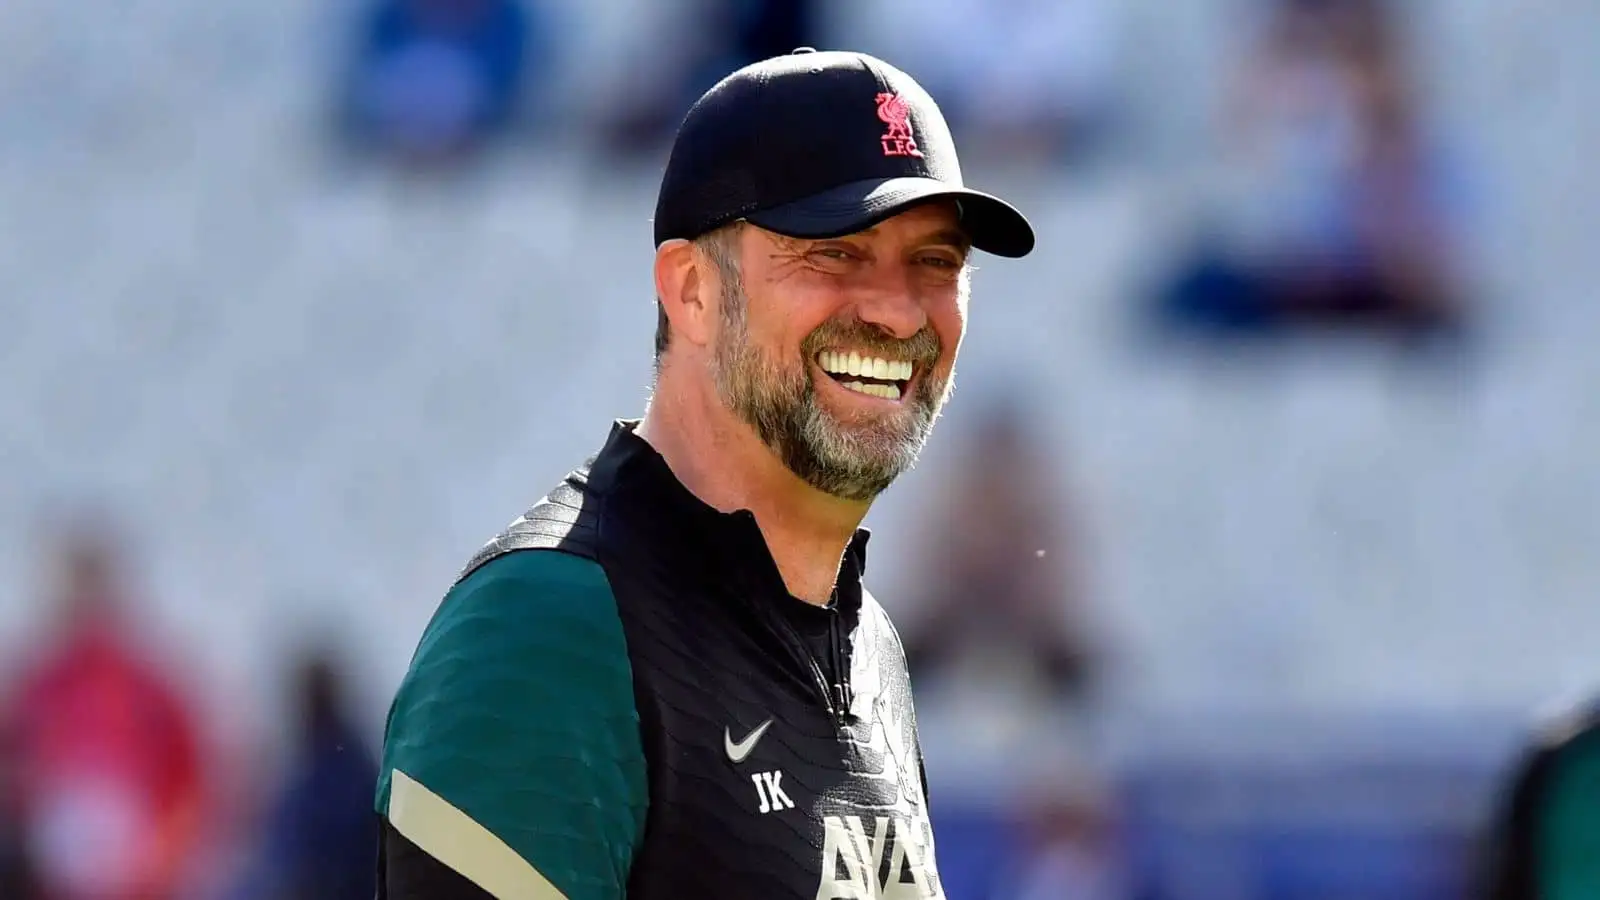 Jurgen Klopp of Liverpool seen during a training session before the UEFA Champions League final between Liverpool and Real Madrid at the Stade de France in Paris